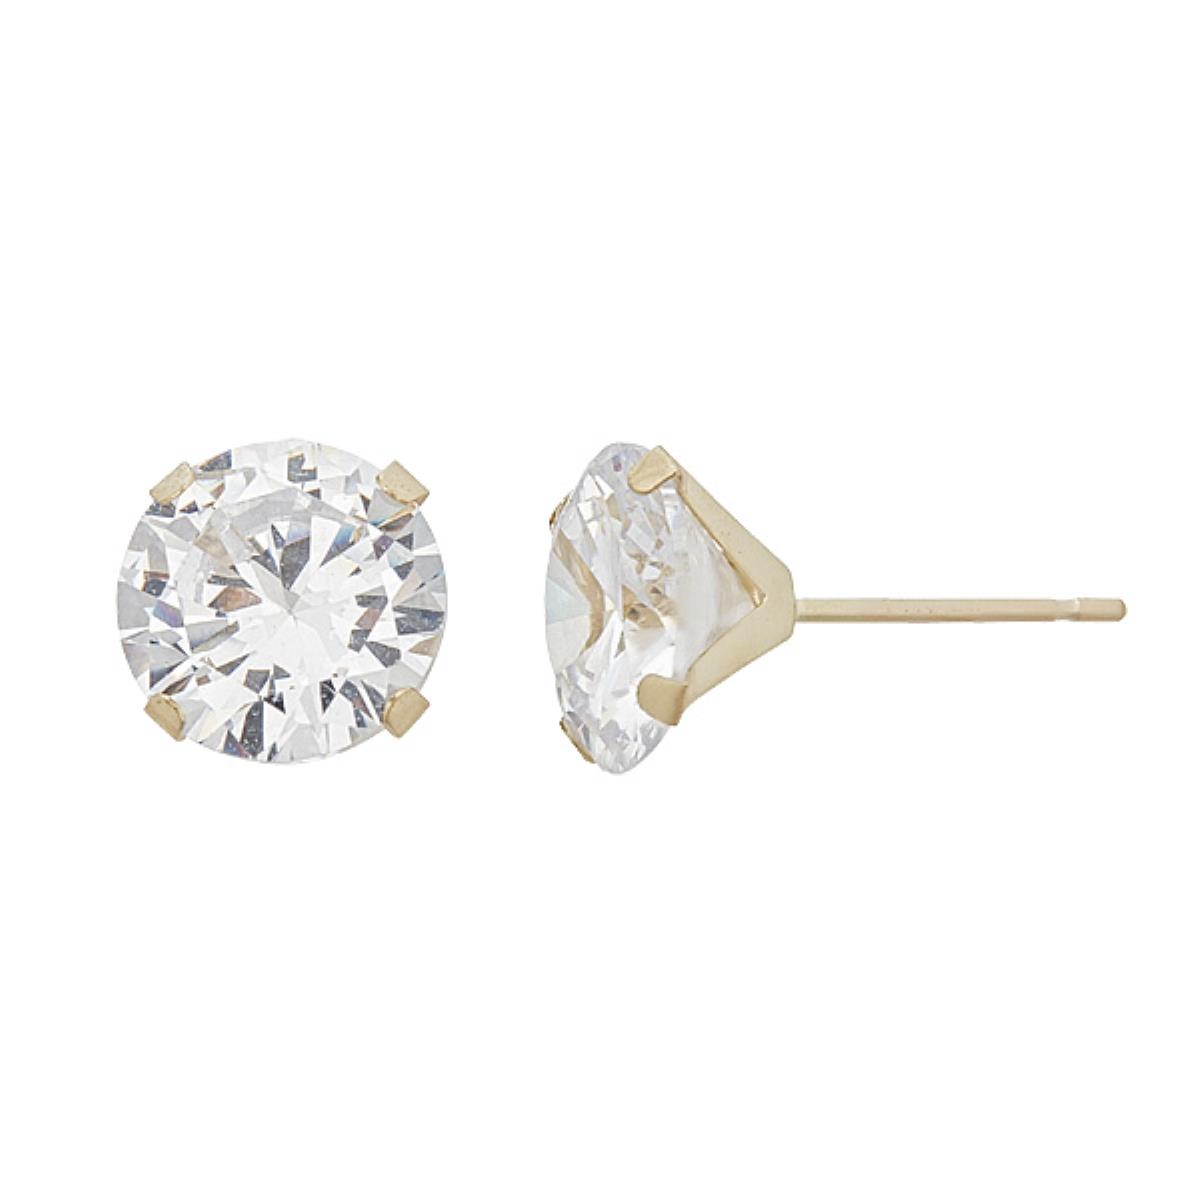 10K Yellow Gold 10mm Martini Round Cut Solitaire Stud Earring